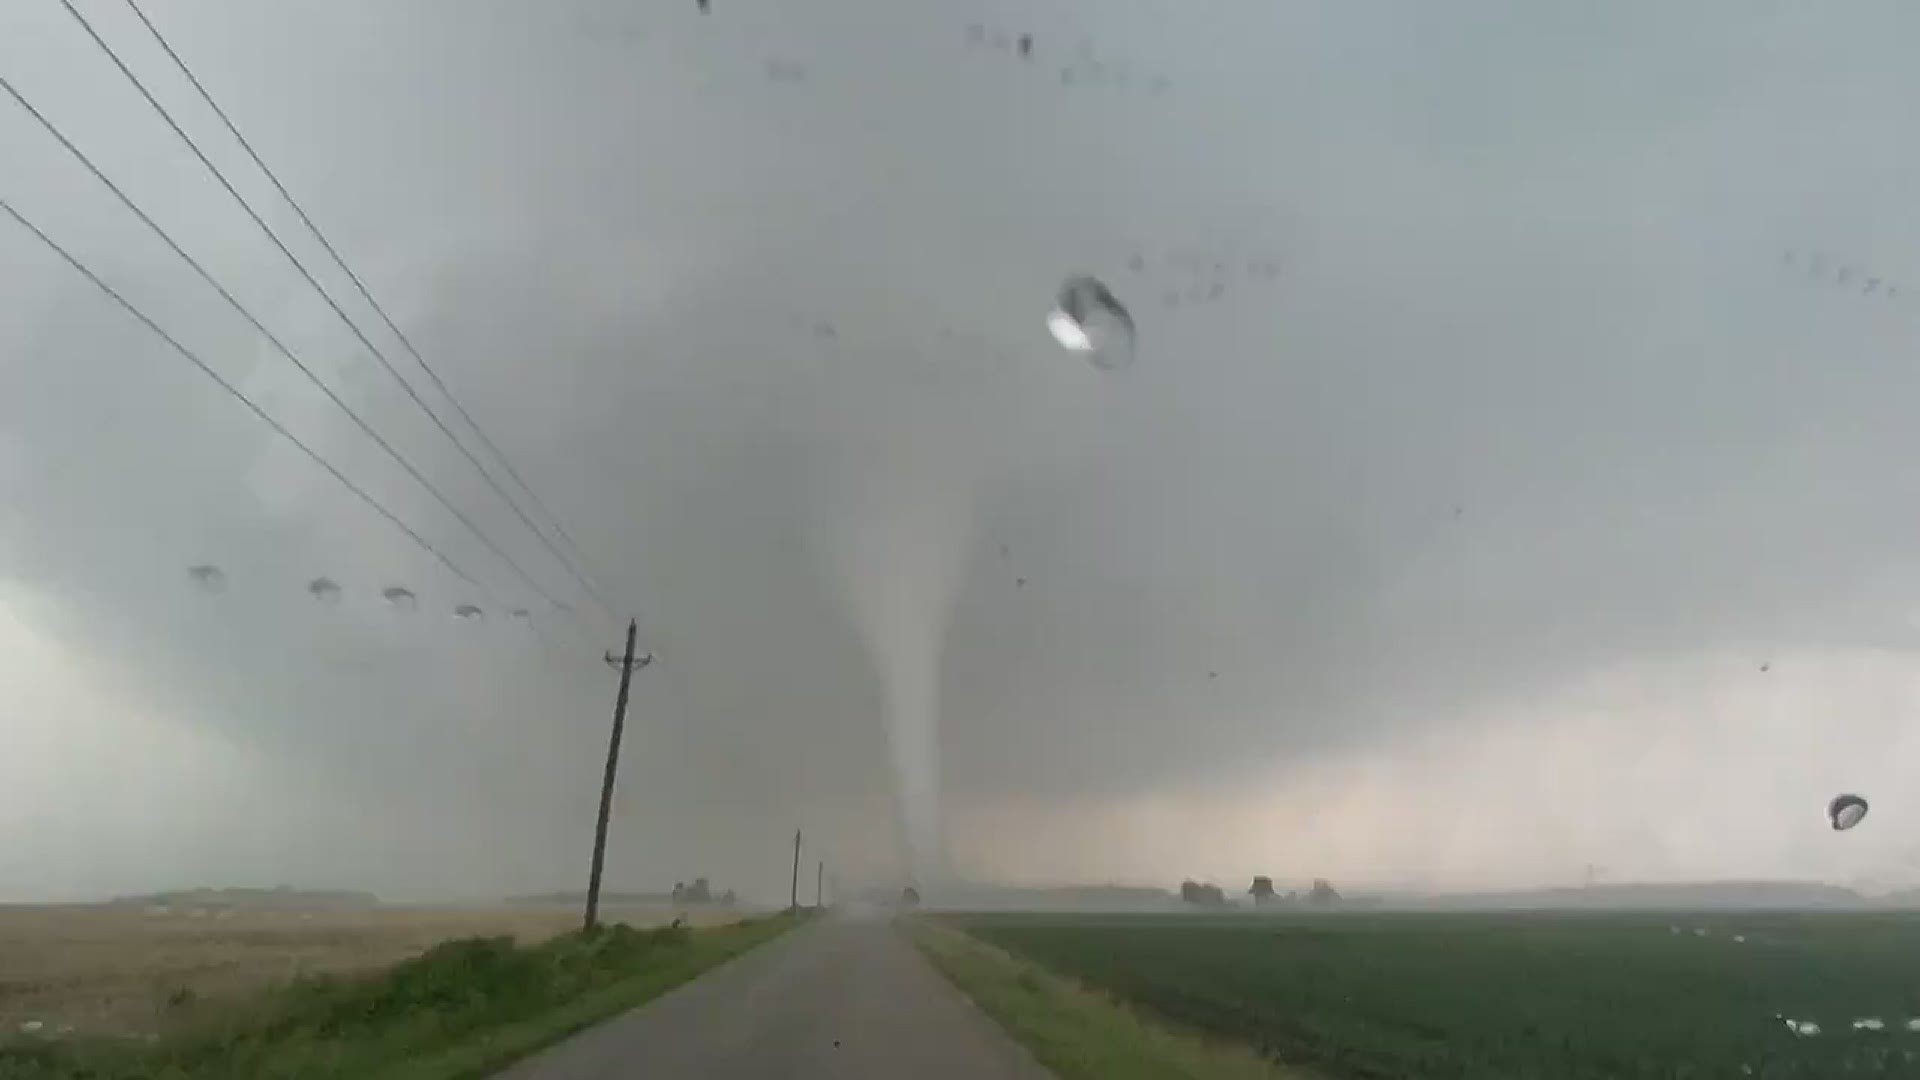 Driver captures video of tornado in Jay County, Indiana on June 18